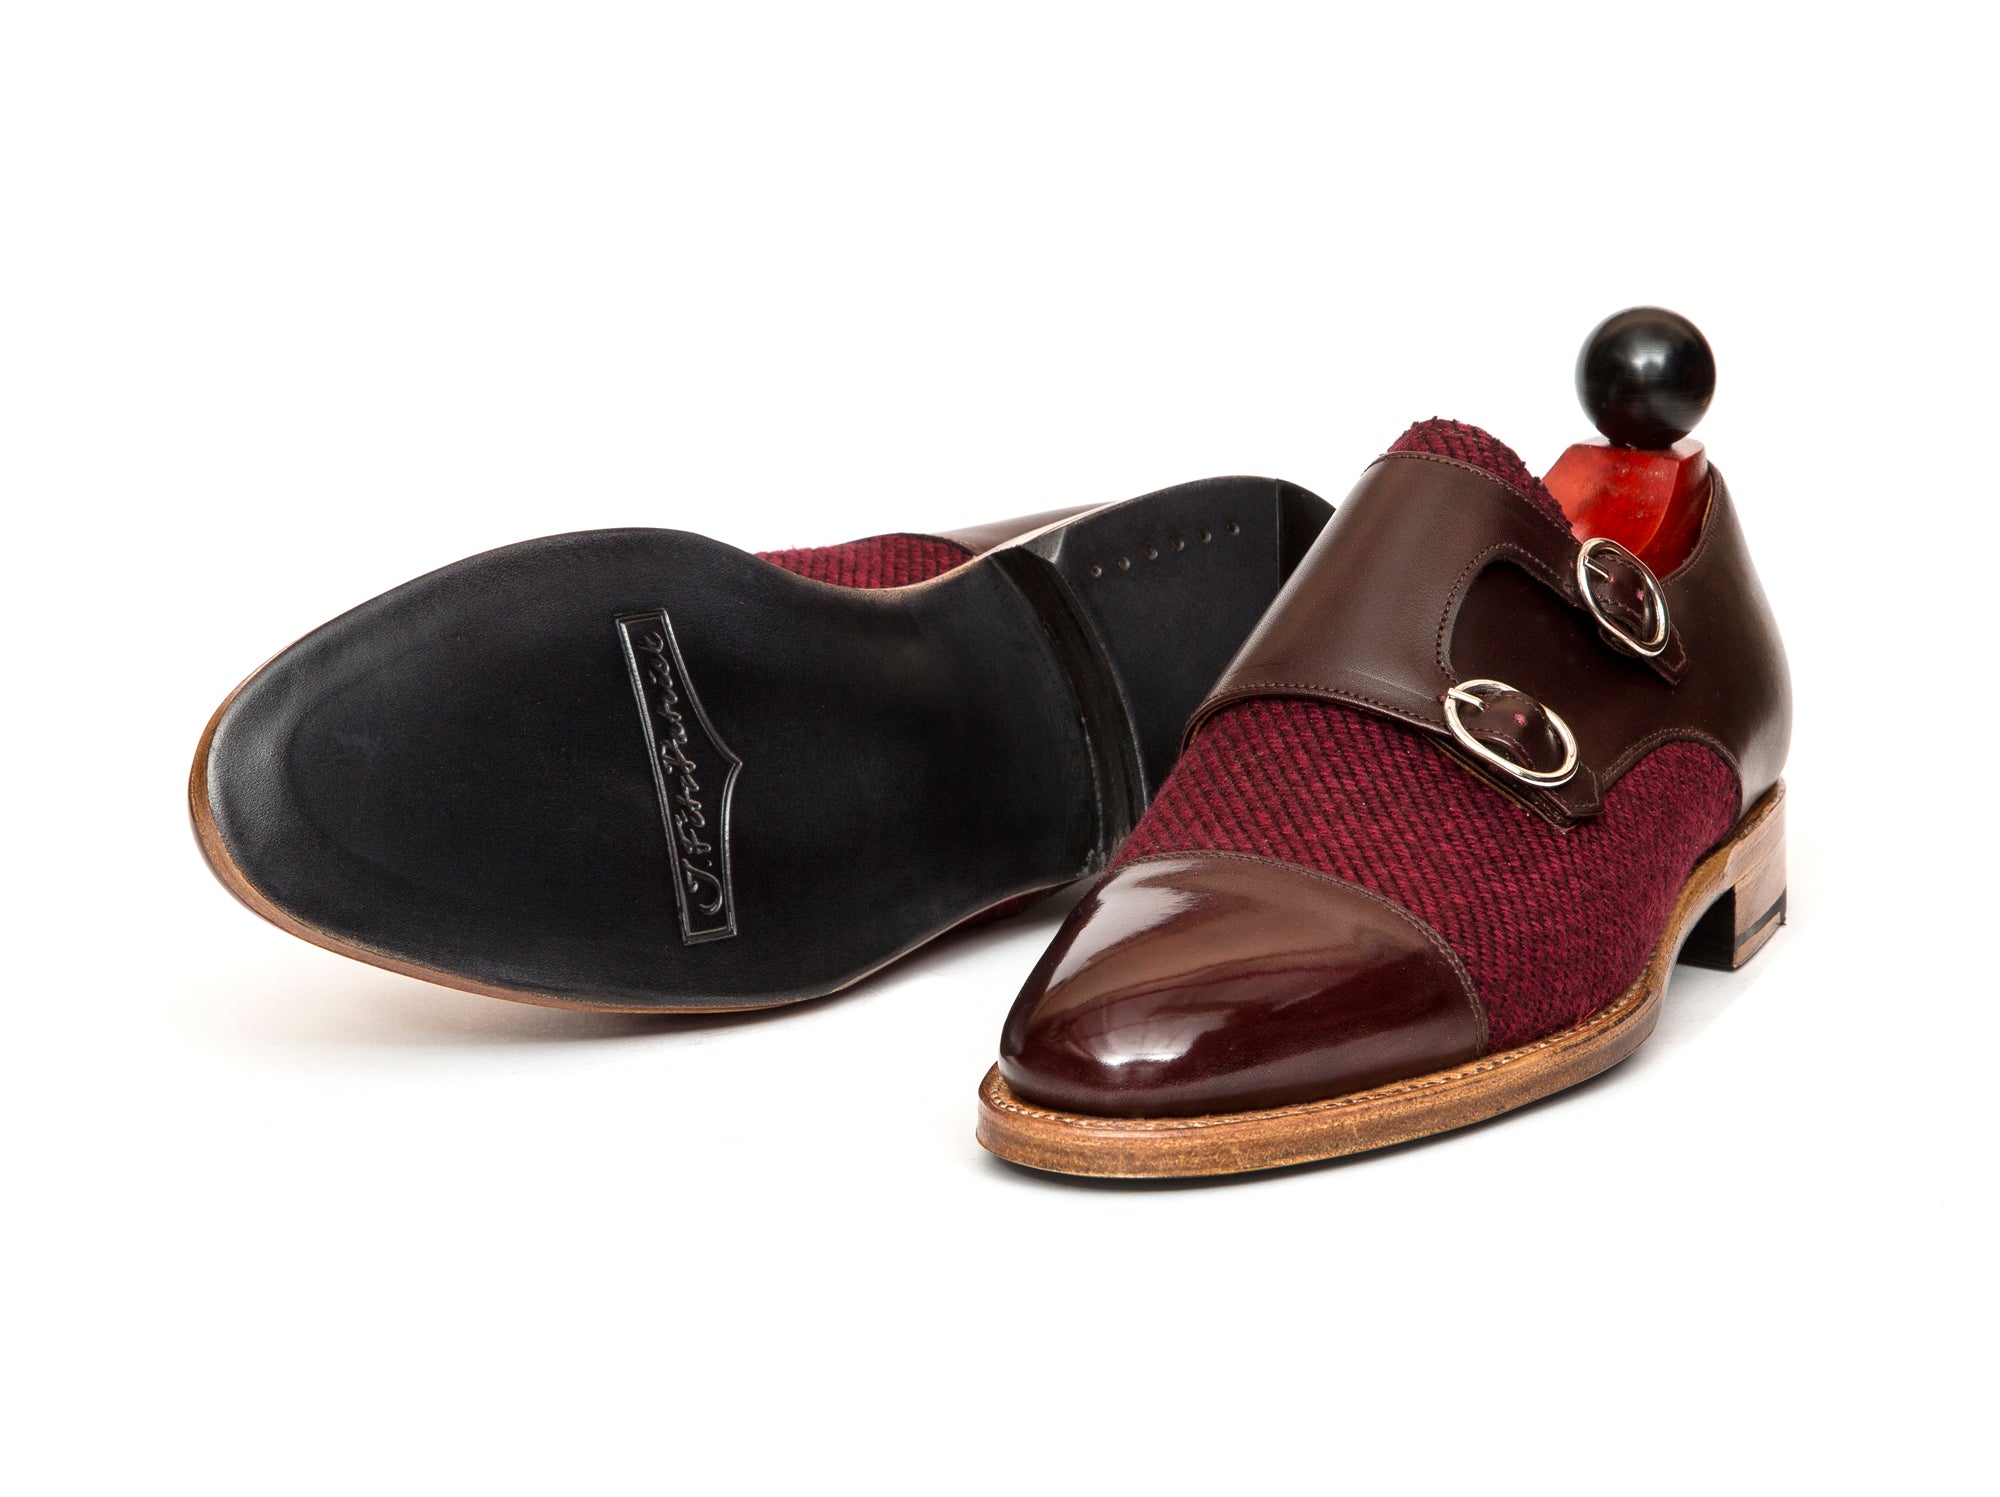 Kent - MTO - Burgundy Calf / Red Poulsbo - TMG Last - Natural Single Leather Sole